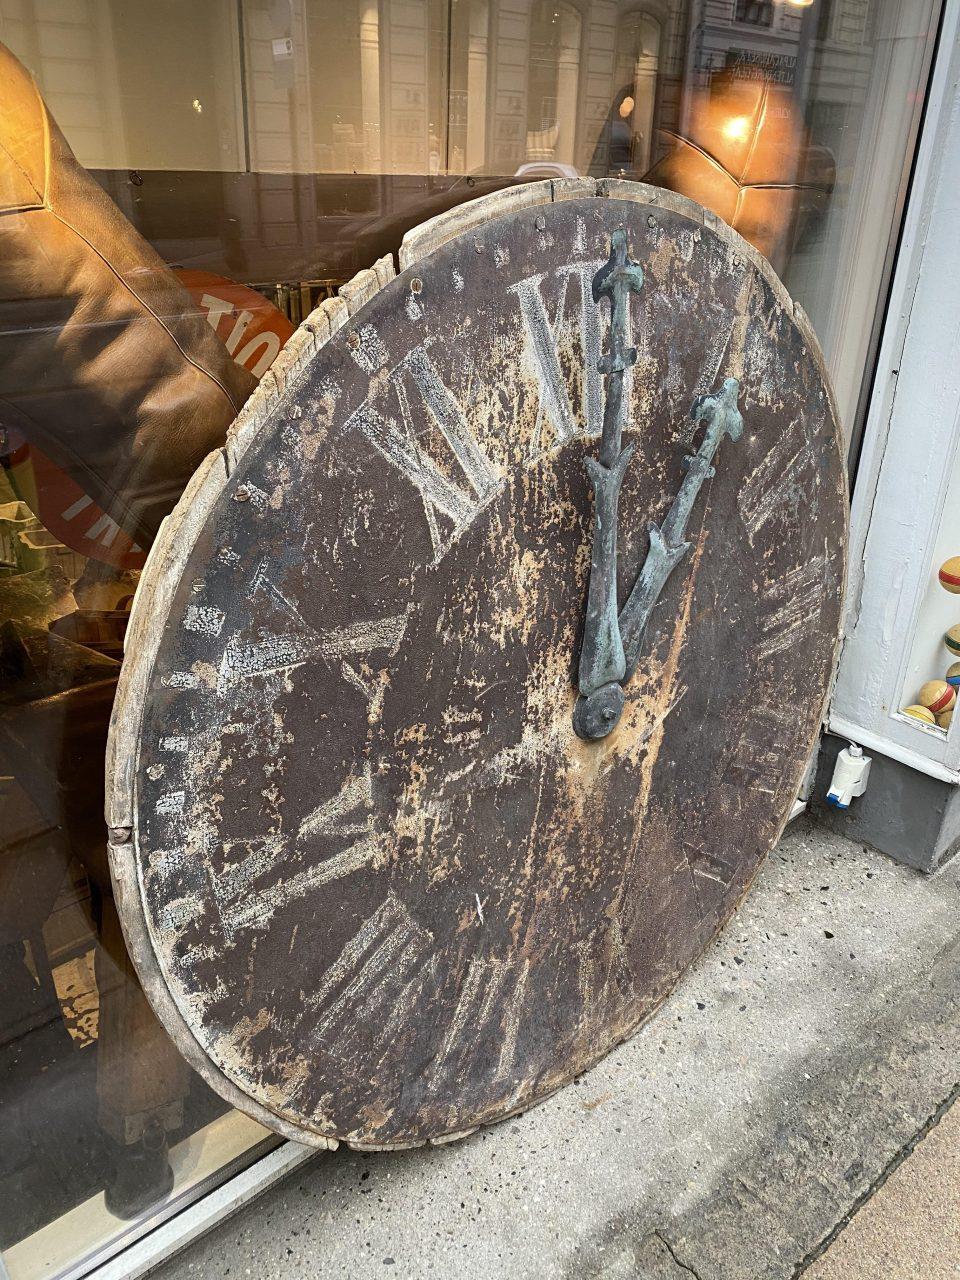 Enormous vintage French ‘CADRAN’ clock face. Originally from a church or town hall tower. Wonderful wooden Roman numerals on a wooden face. Lots of weathered patina, a super wall decoration.